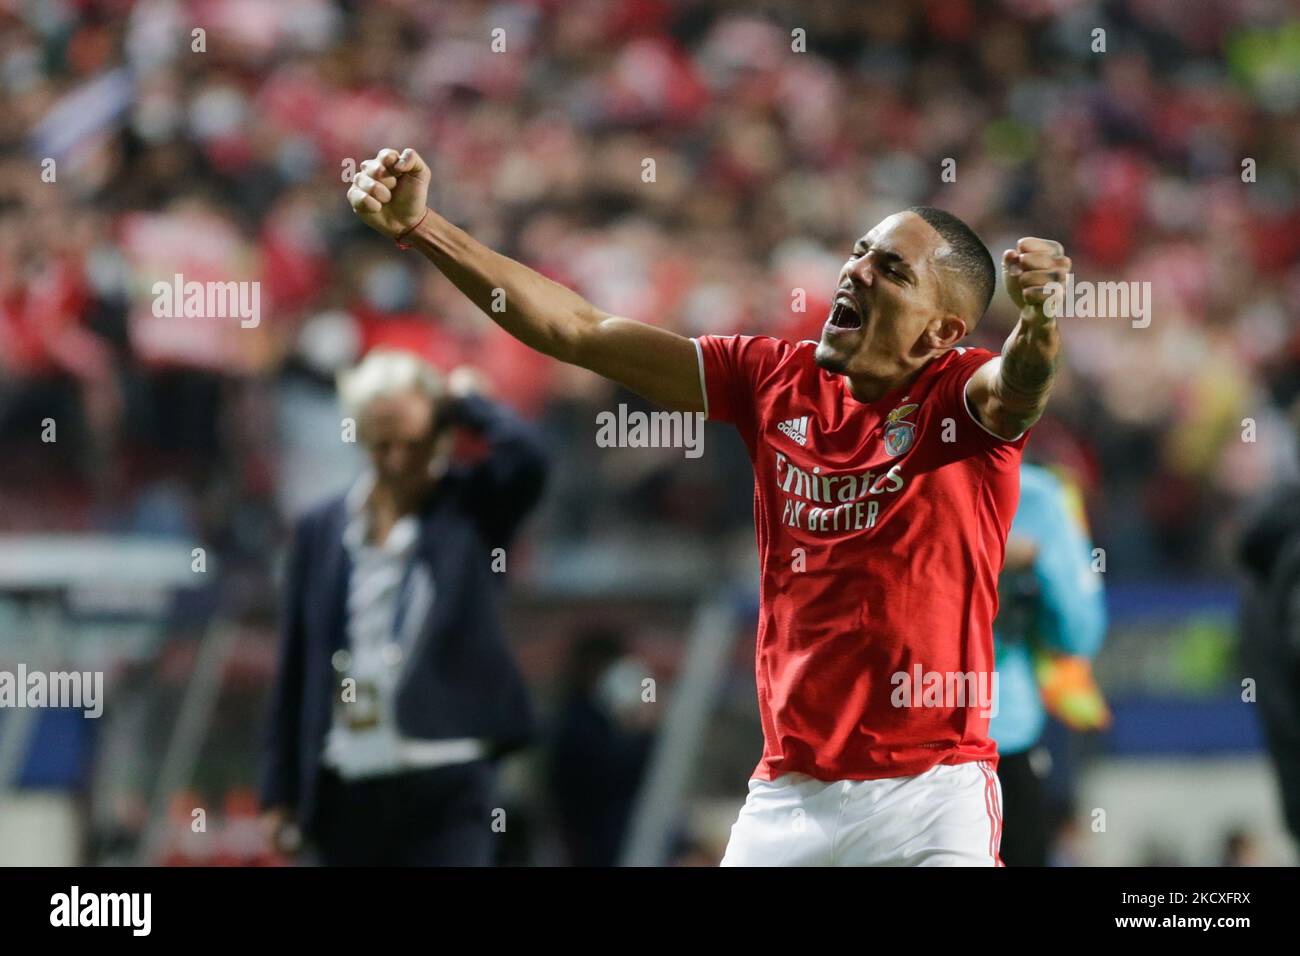 Gilberto defender of SL Benfica celebrates after scoring a goal during the UEFA Champions League Group E match between SL Benfica and FK Dynamo Kyiv at Estadio da Luz, in Lisbon, Portugal on 8th December, 2021 (Photo by Valter Gouveia/NurPhoto) Stock Photo